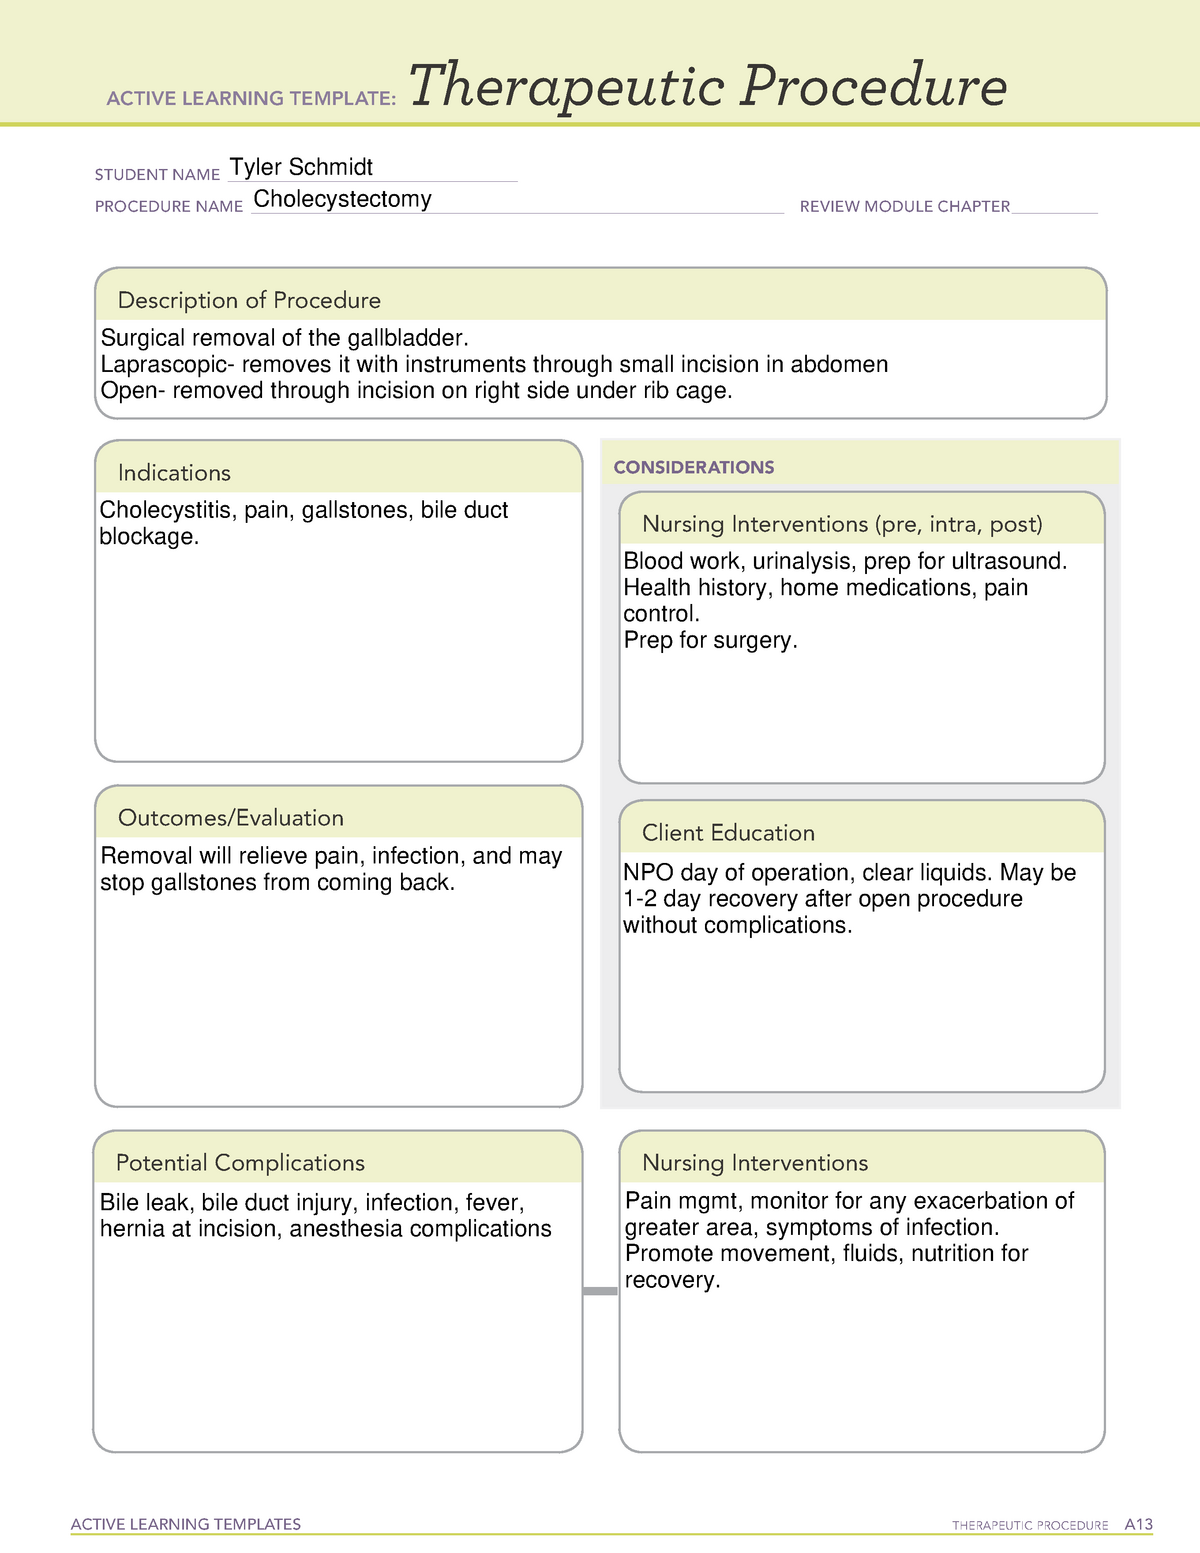 cholecystectomy-active-learning-template-therapeutic-procedure-active-learning-templates-studocu